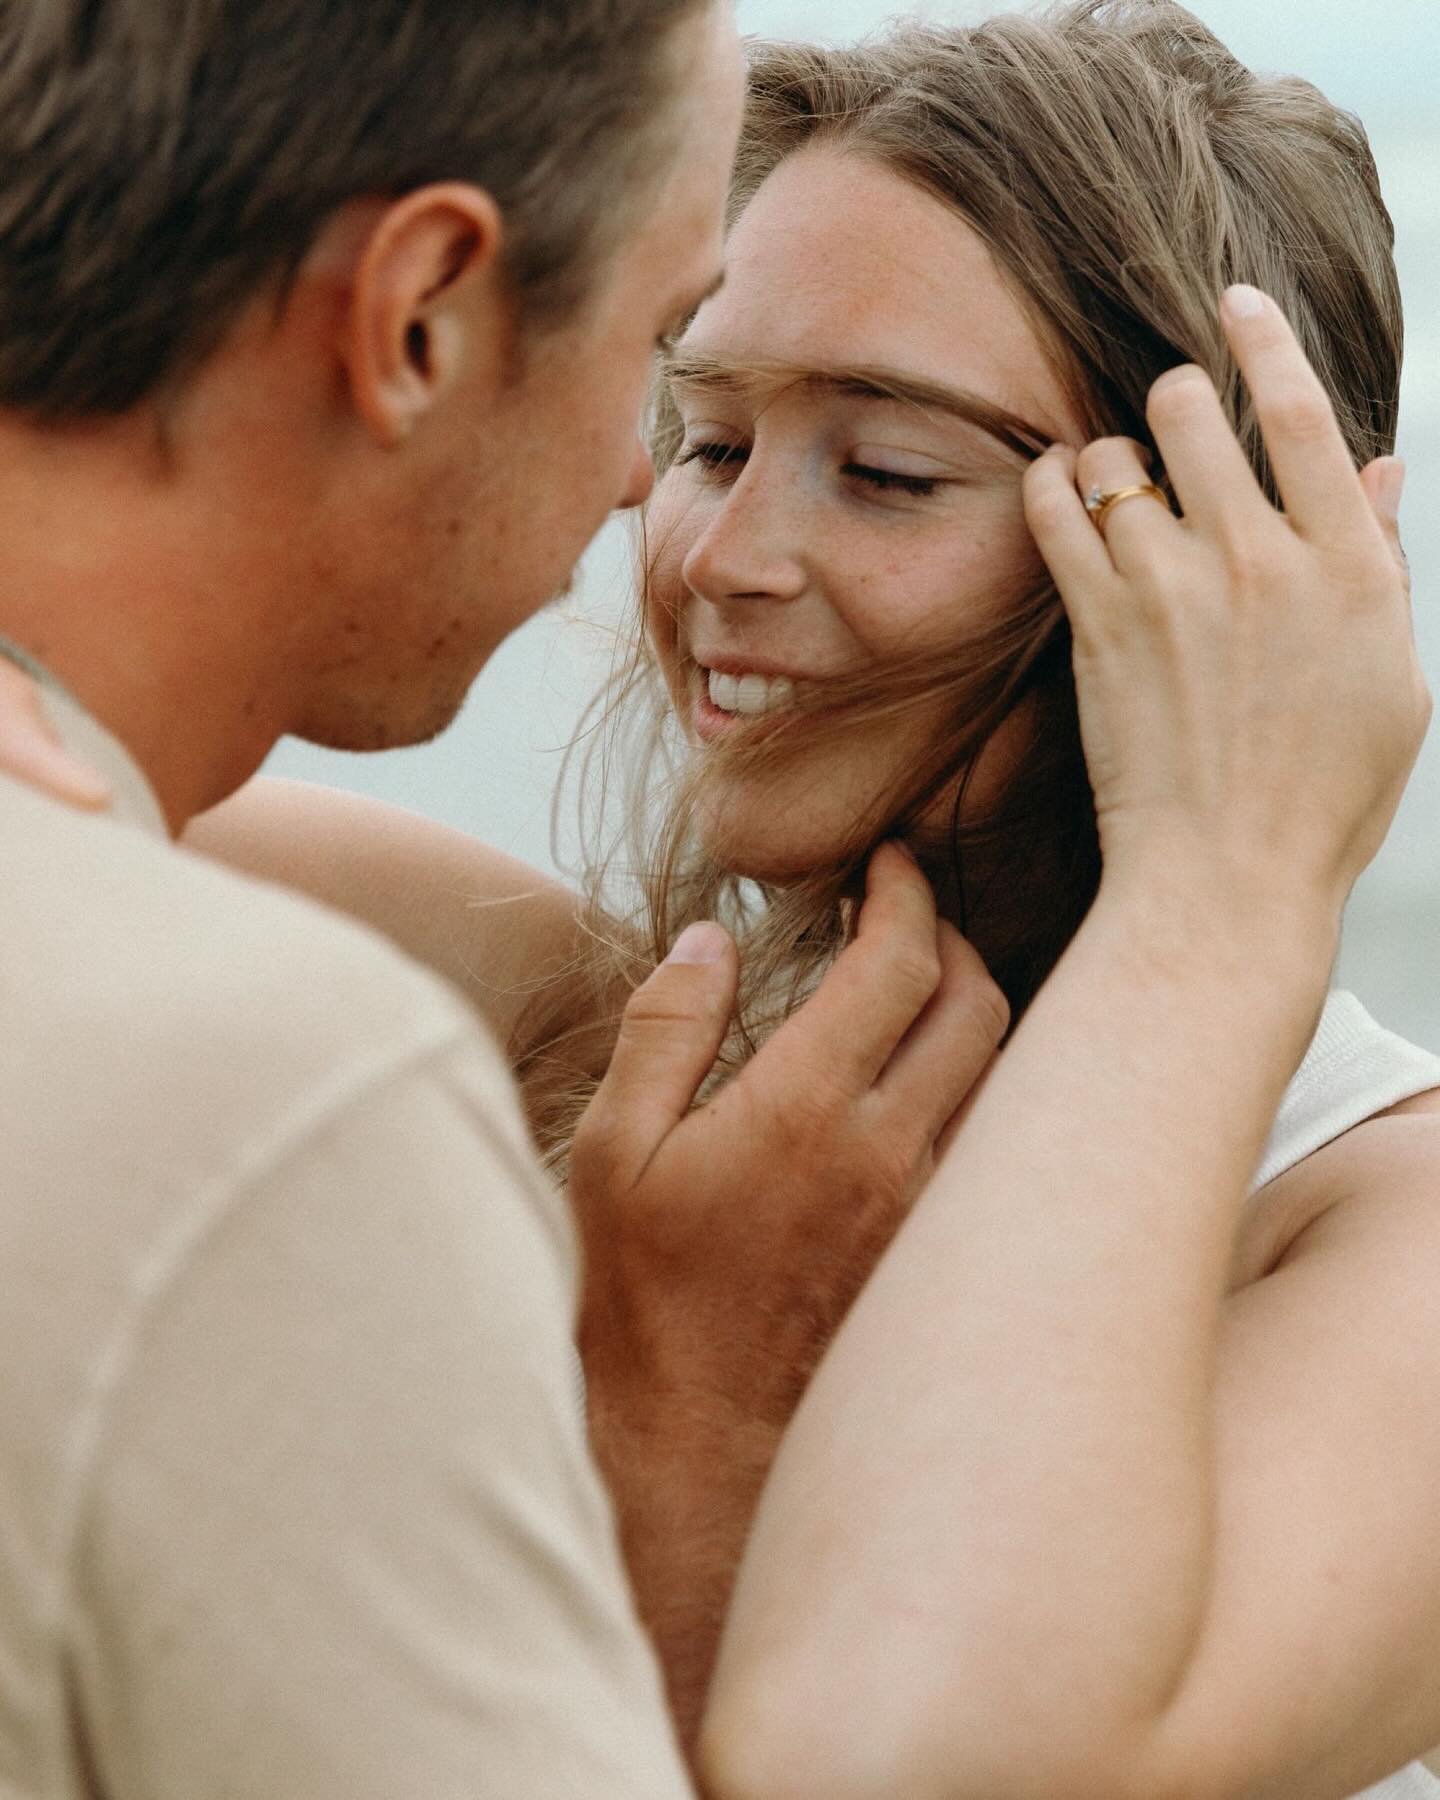 Okay this session with Beth and Jared is still so vivid in my head. These two lovebirds frolicked on the sand and spun in circles and smiled until their cheeks got sore. The love between these two was so evident and adorable. There was a tumble taken